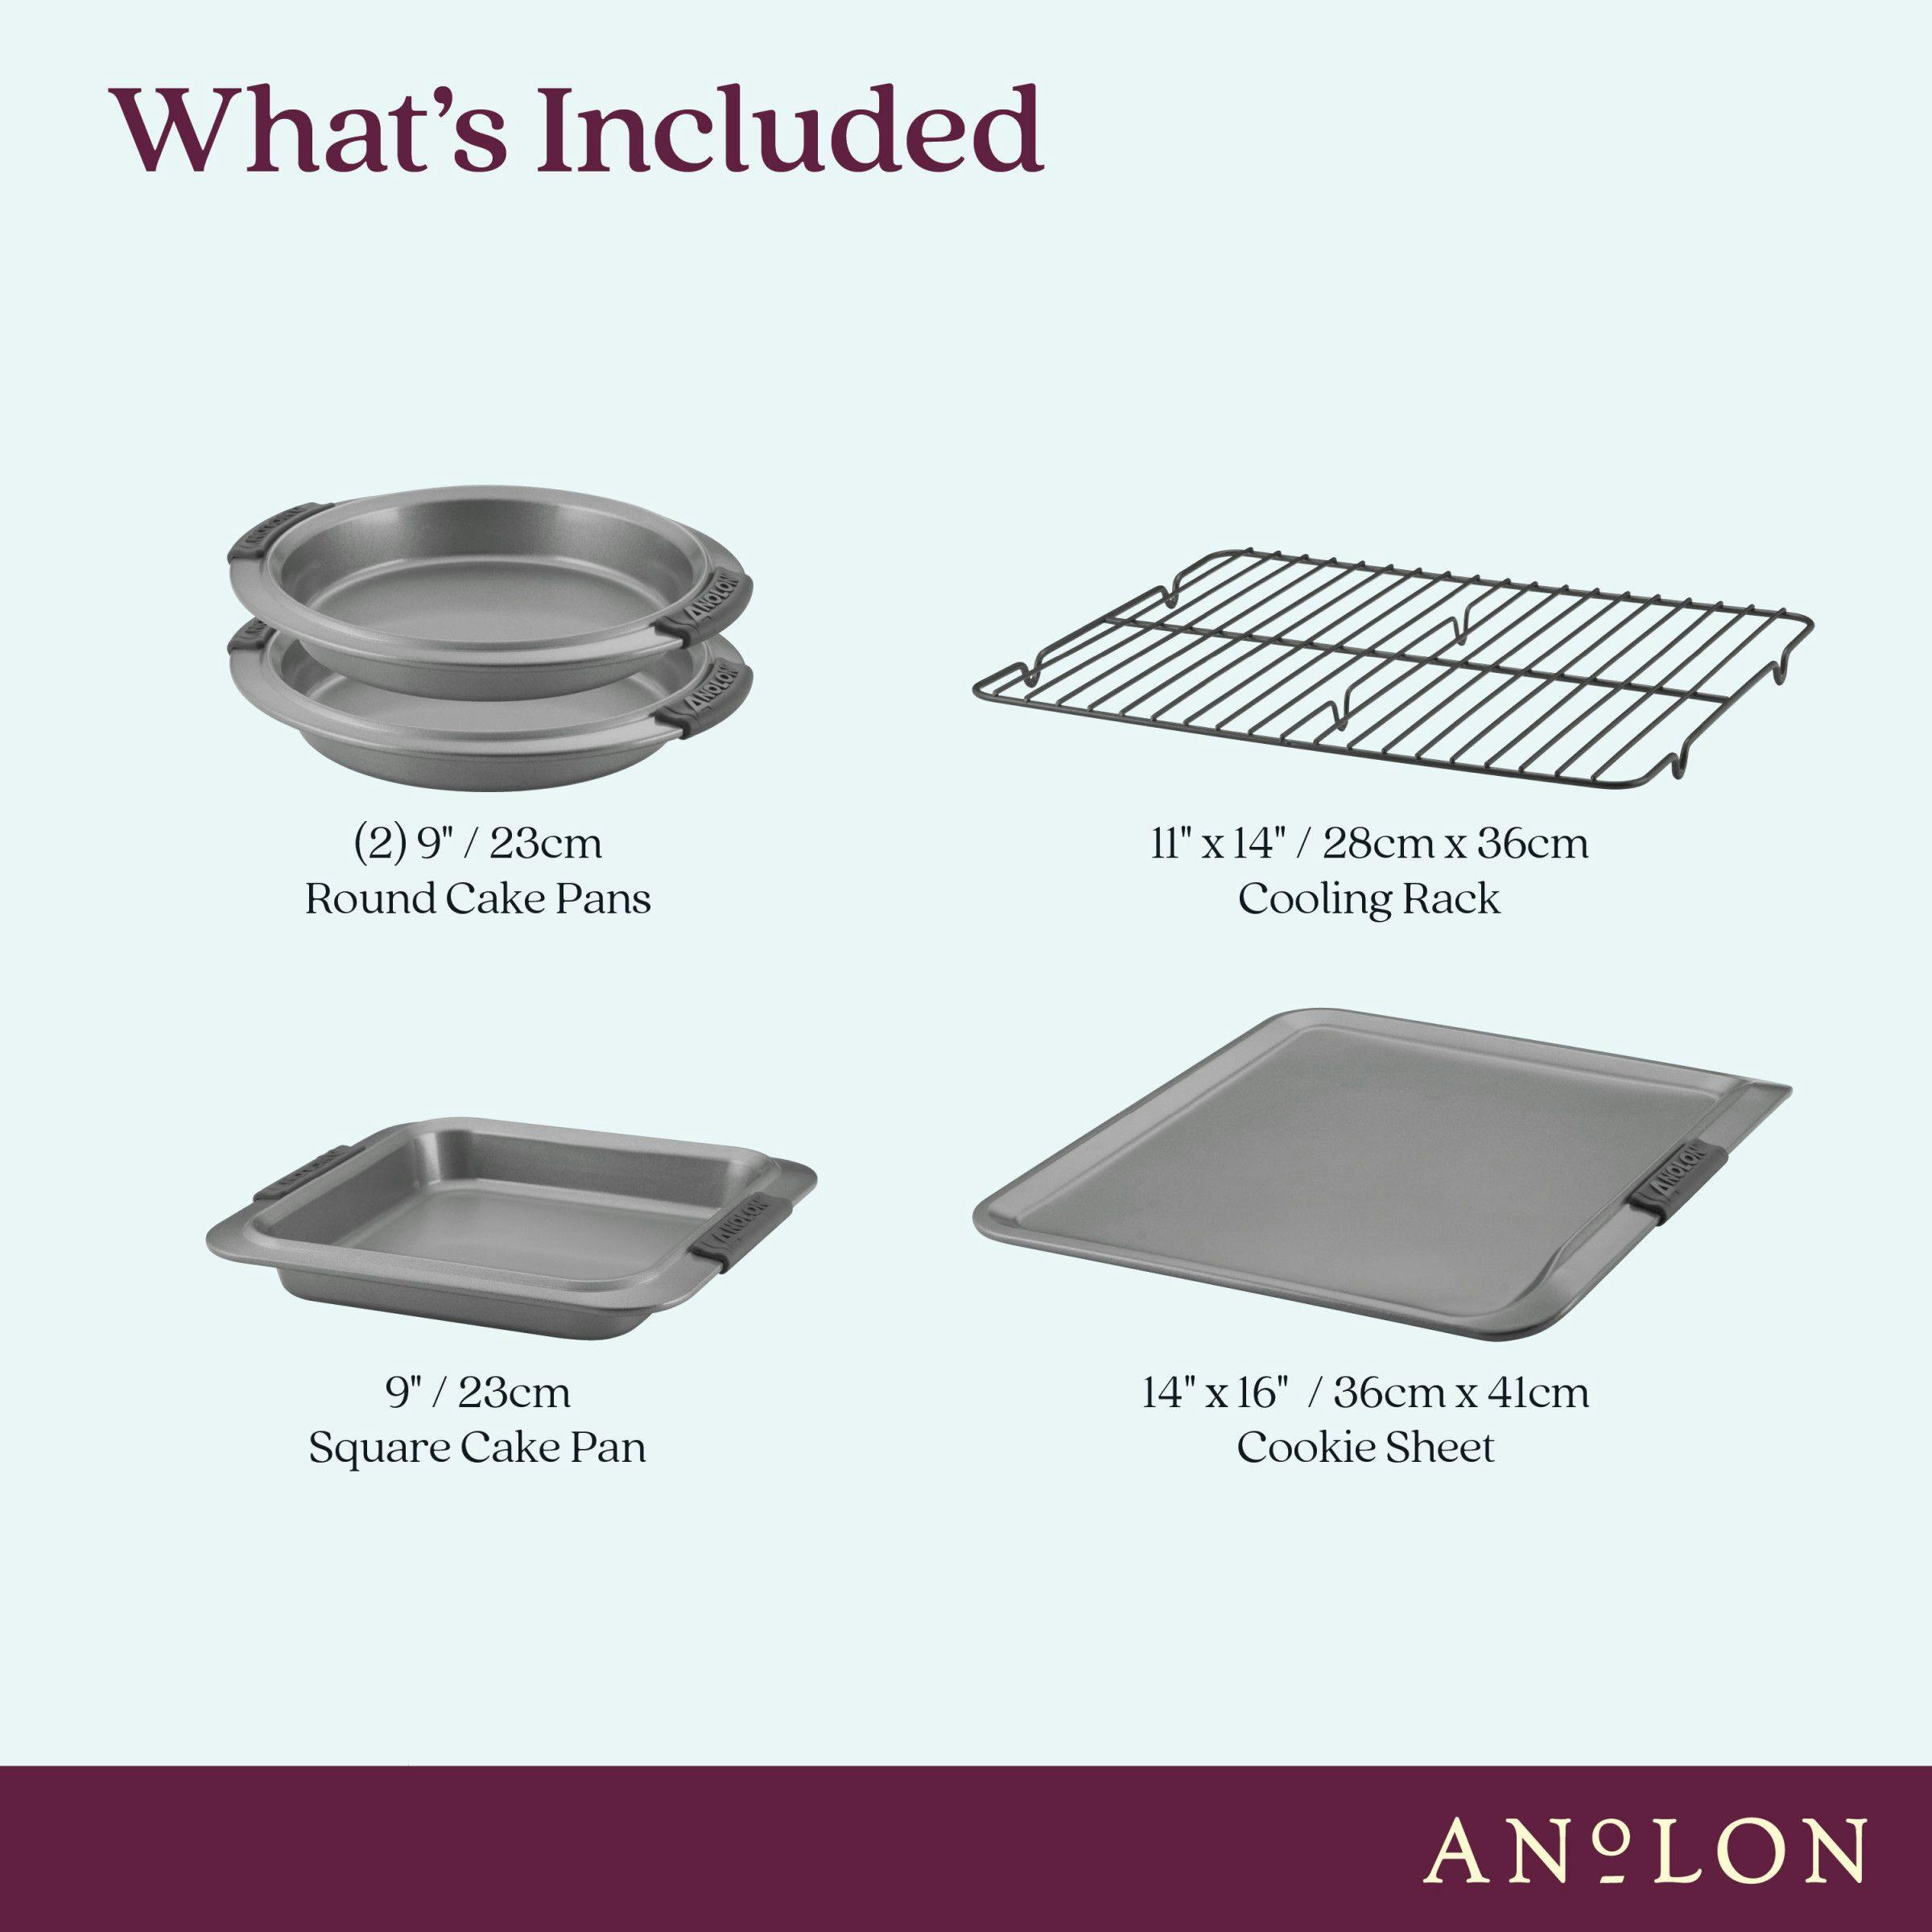 Anolon Advanced Nonstick Bakeware Set with Silicone Grips, 5-Piece, Gray